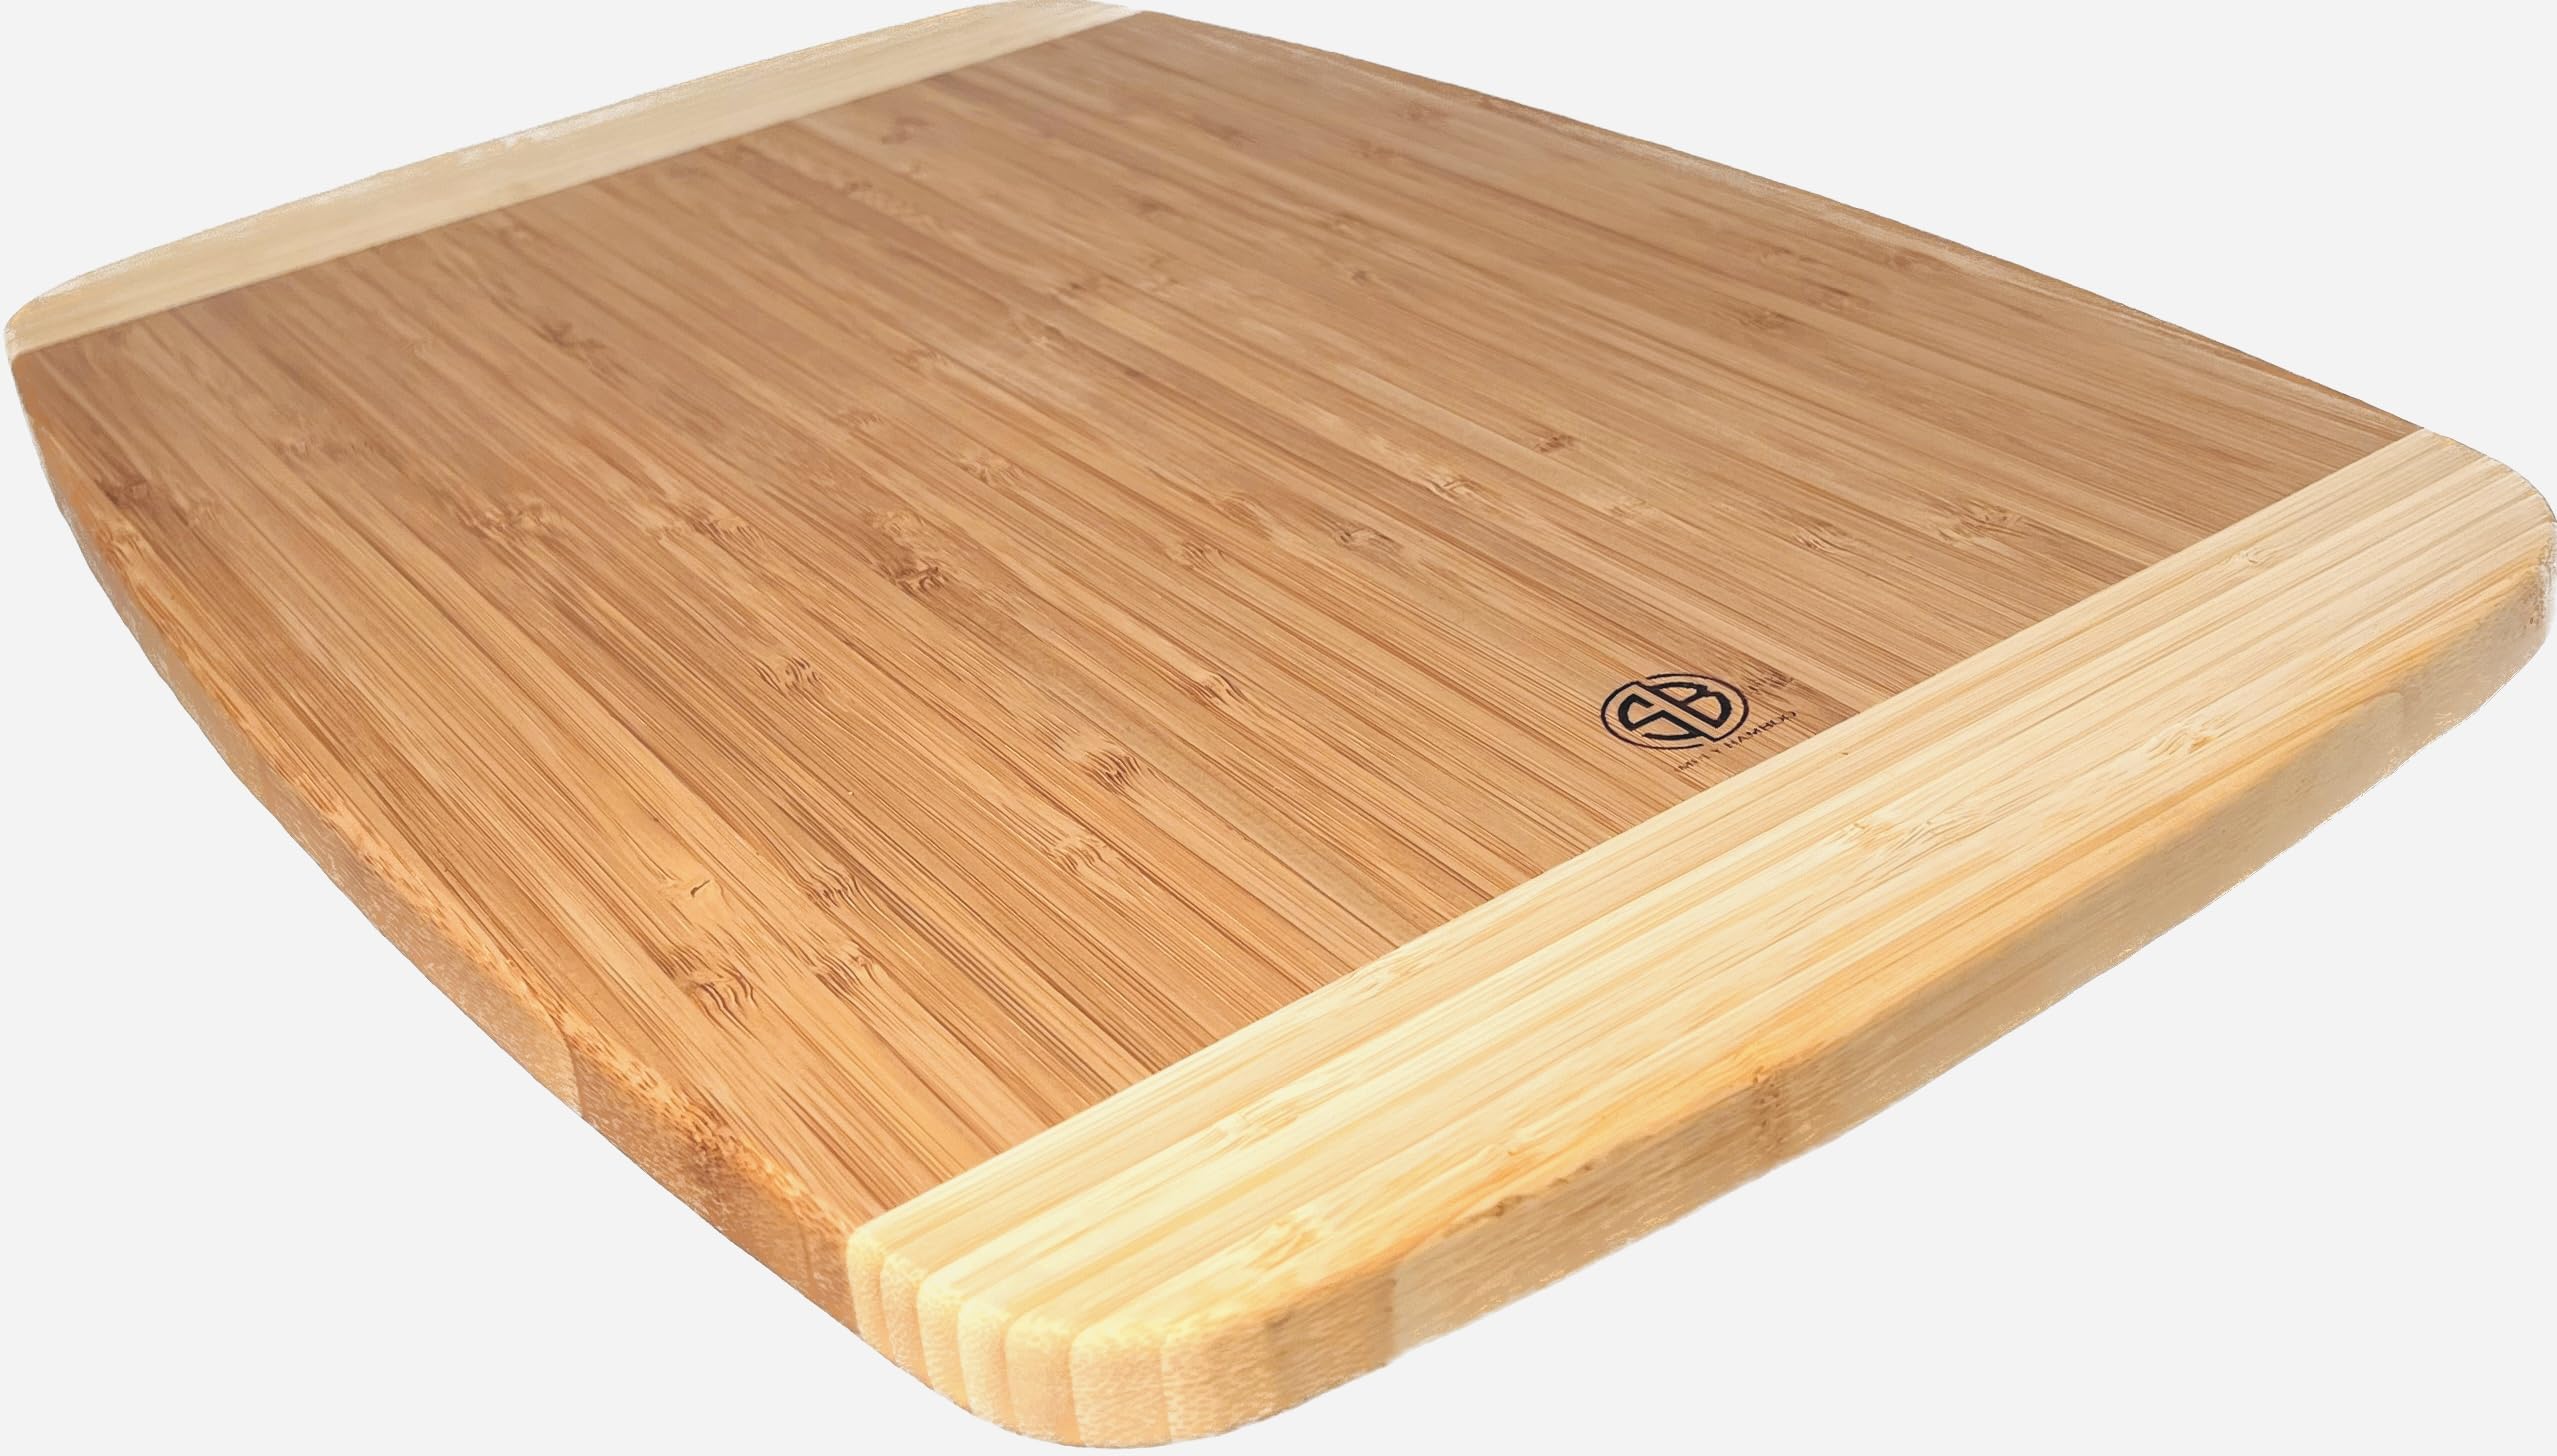 Simply Bamboo CBN118 18 X 12 Napa Multicolor Bamboo Wood Cutting Board for Kitchen | Chopping Board | Carving/Slicing Vegetables, Meat, Fruits | 100% Organic & Safe Wood - 8" x 12" x 0.75"